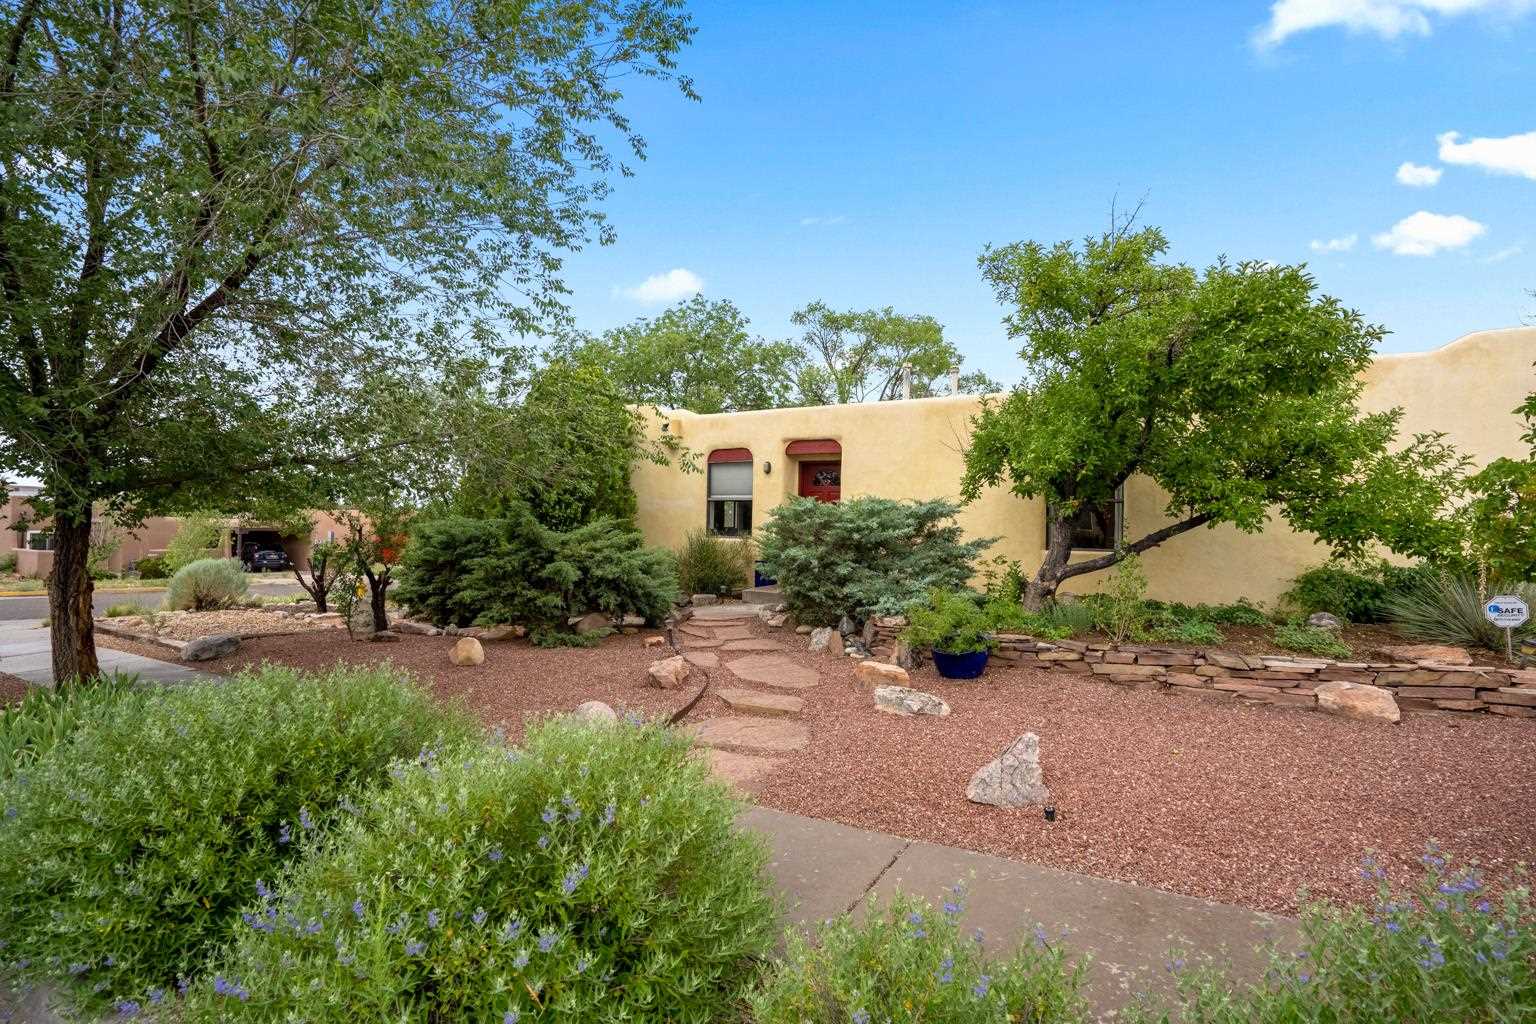 110 Calle Don Jose, Santa Fe, New Mexico 87501, 3 Bedrooms Bedrooms, ,2 BathroomsBathrooms,Residential,For Sale,110 Calle Don Jose,202102910